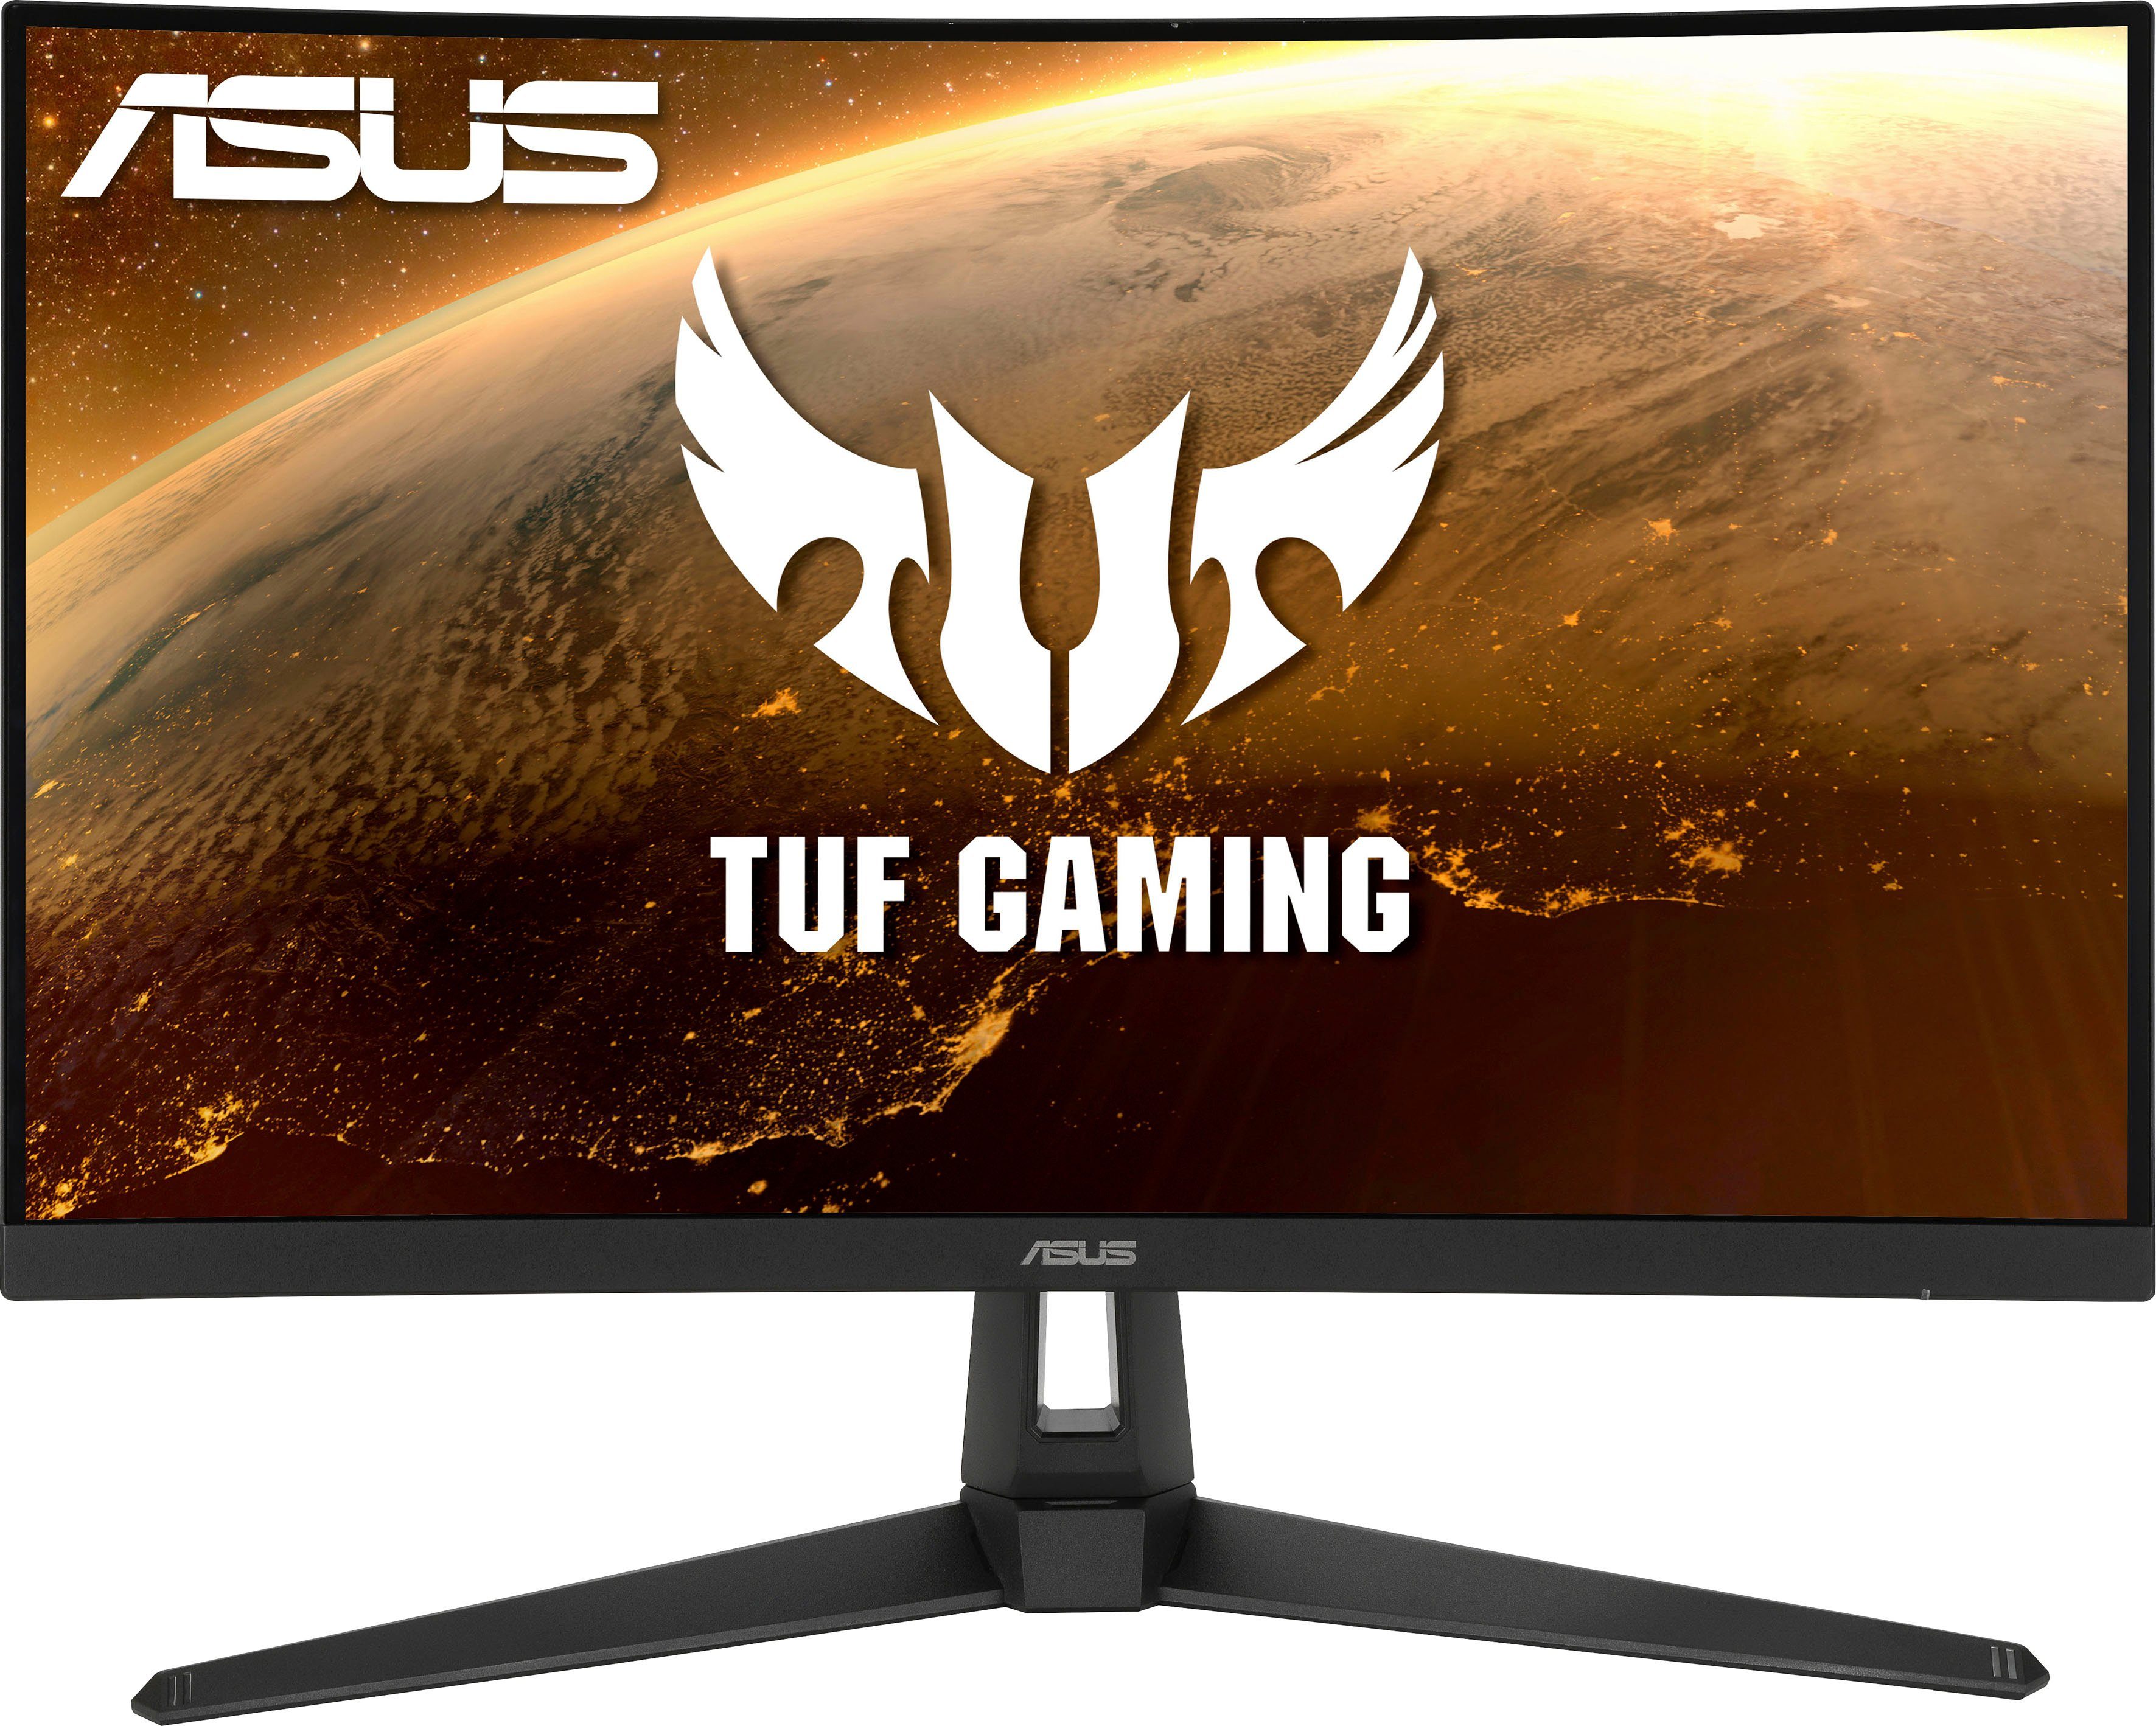 Asus ASUS Monitor LED-Monitor (68,6 cm/27 ", 1920 x 1080 px, Full HD, 1 ms Reaktionszeit, 165 Hz, LED)